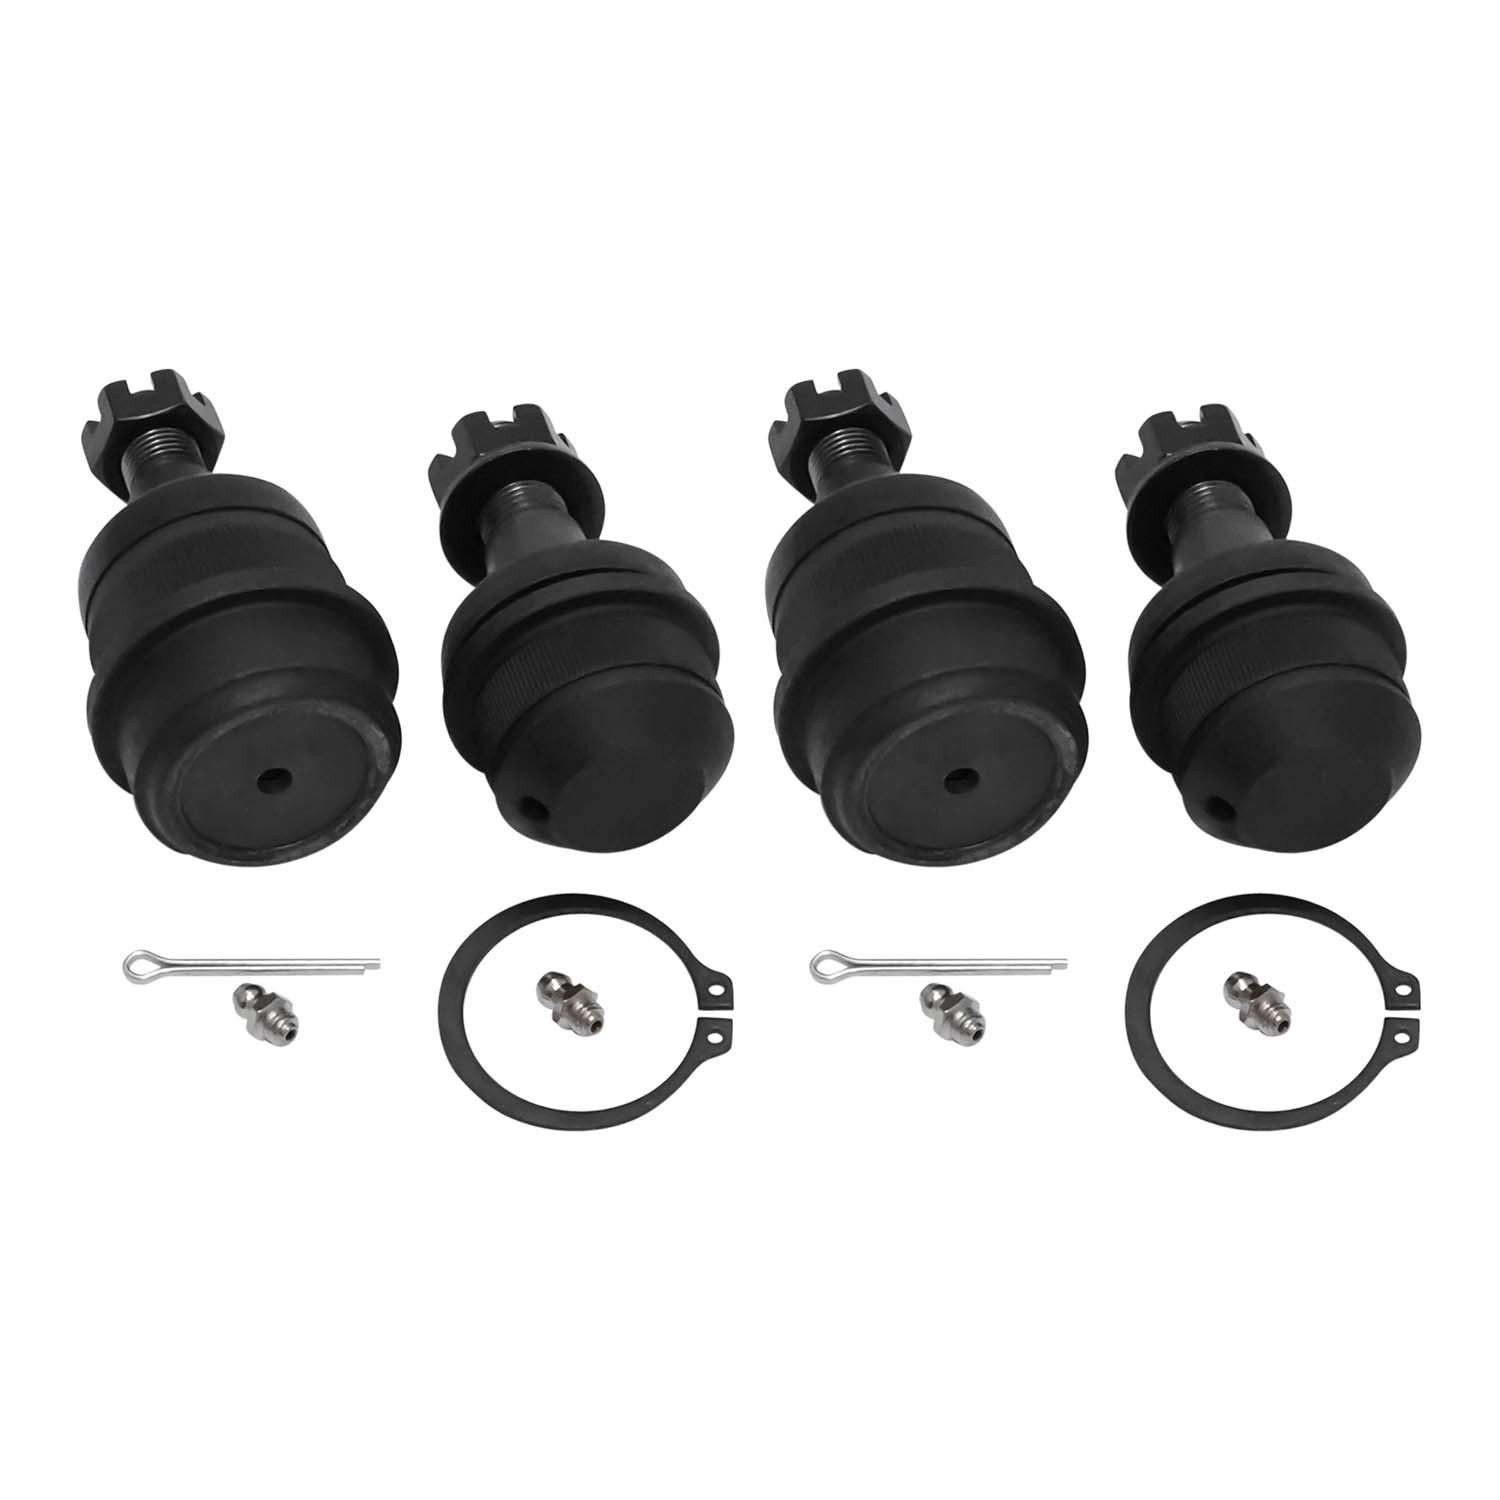 Ball Joint Kit For Dana 30 & Dana 44 Front Differentials, Both Sides